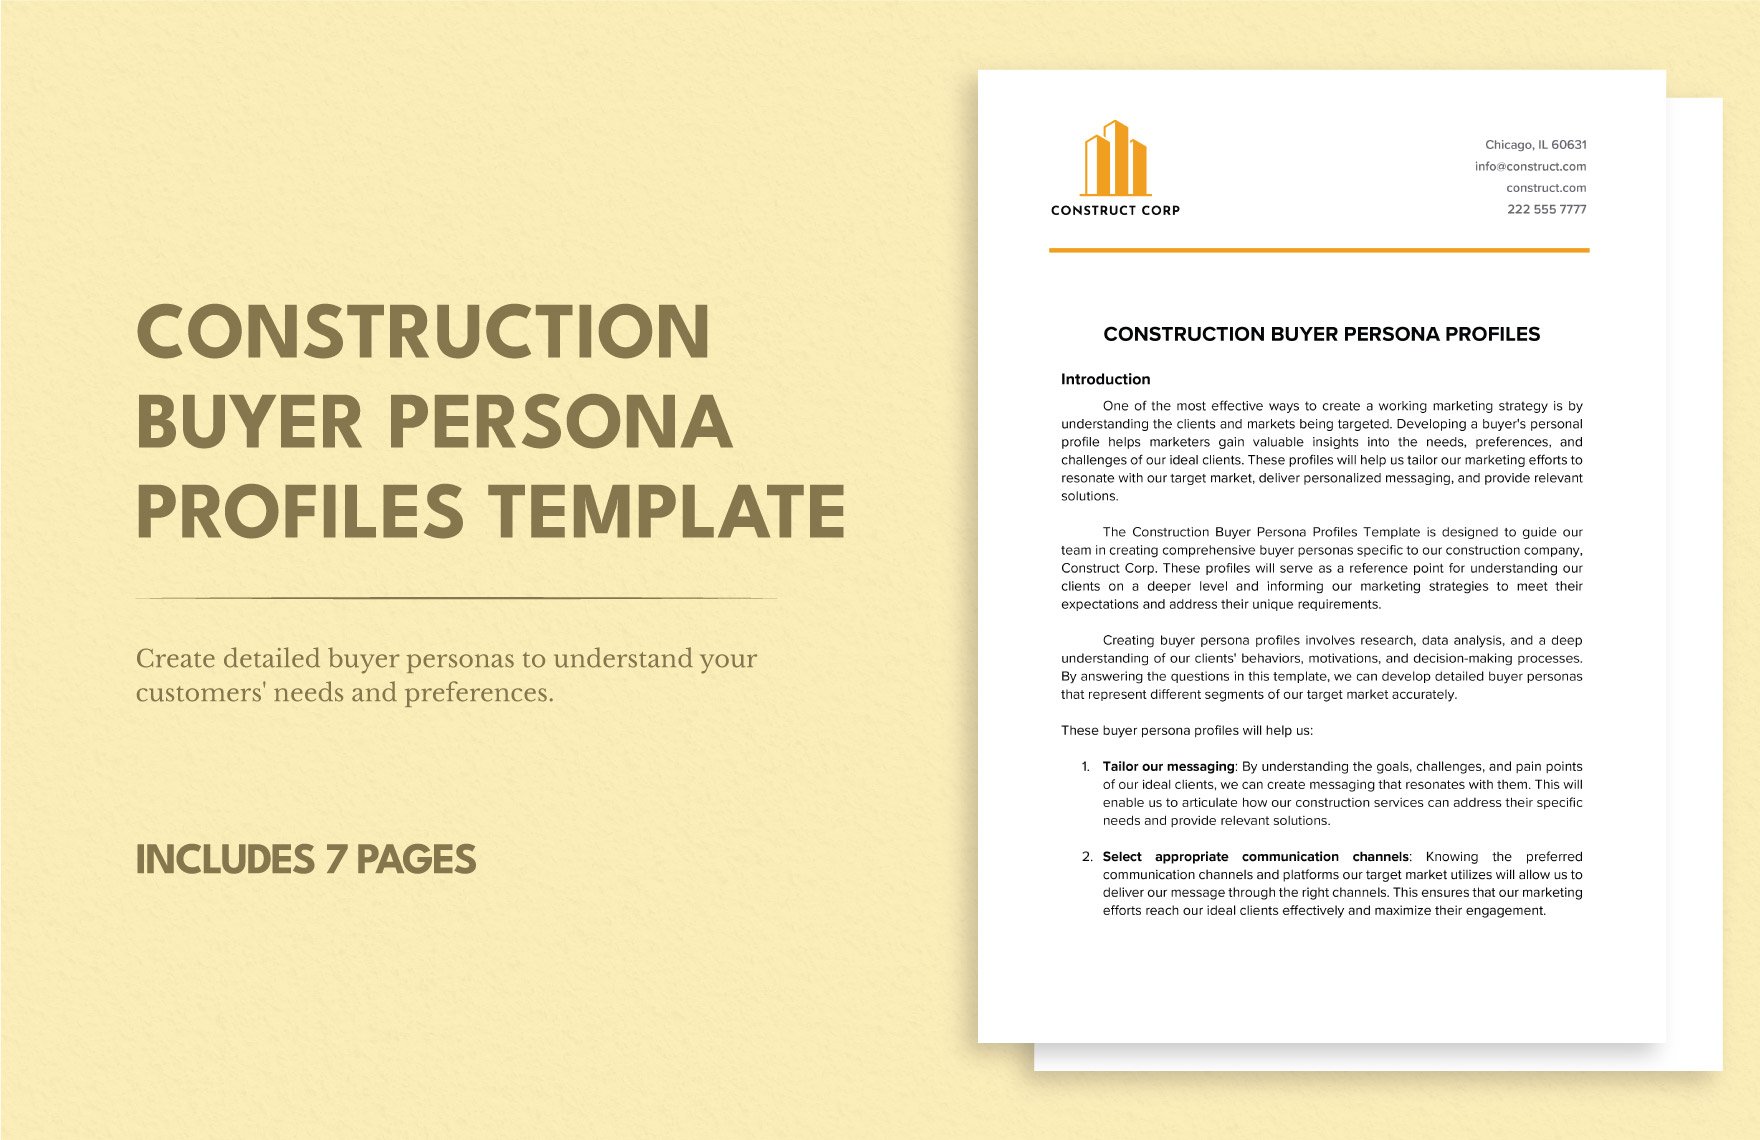 Construction Buyer Persona Profiles Template